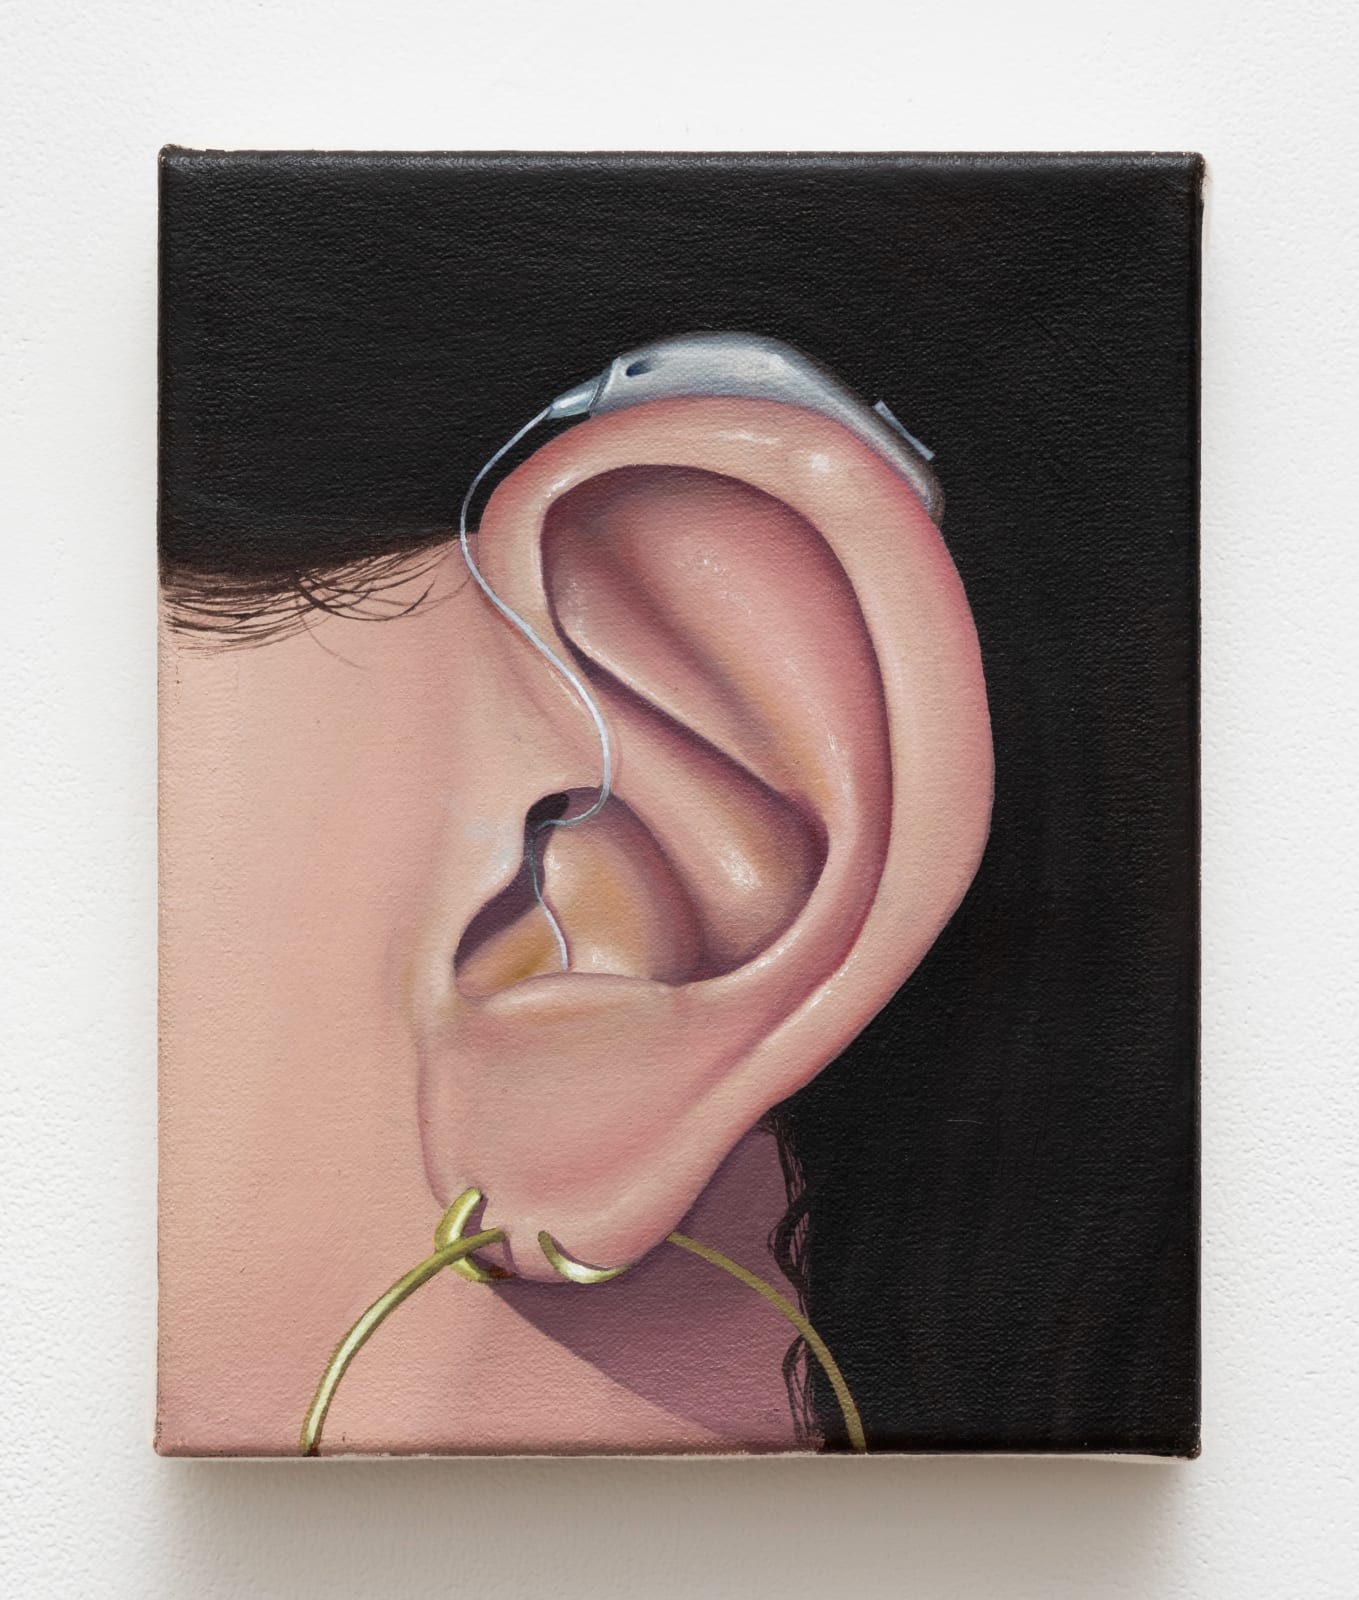 Painting portraying a close-up view of a female’s left ear with hearing aid in the center of the composition.